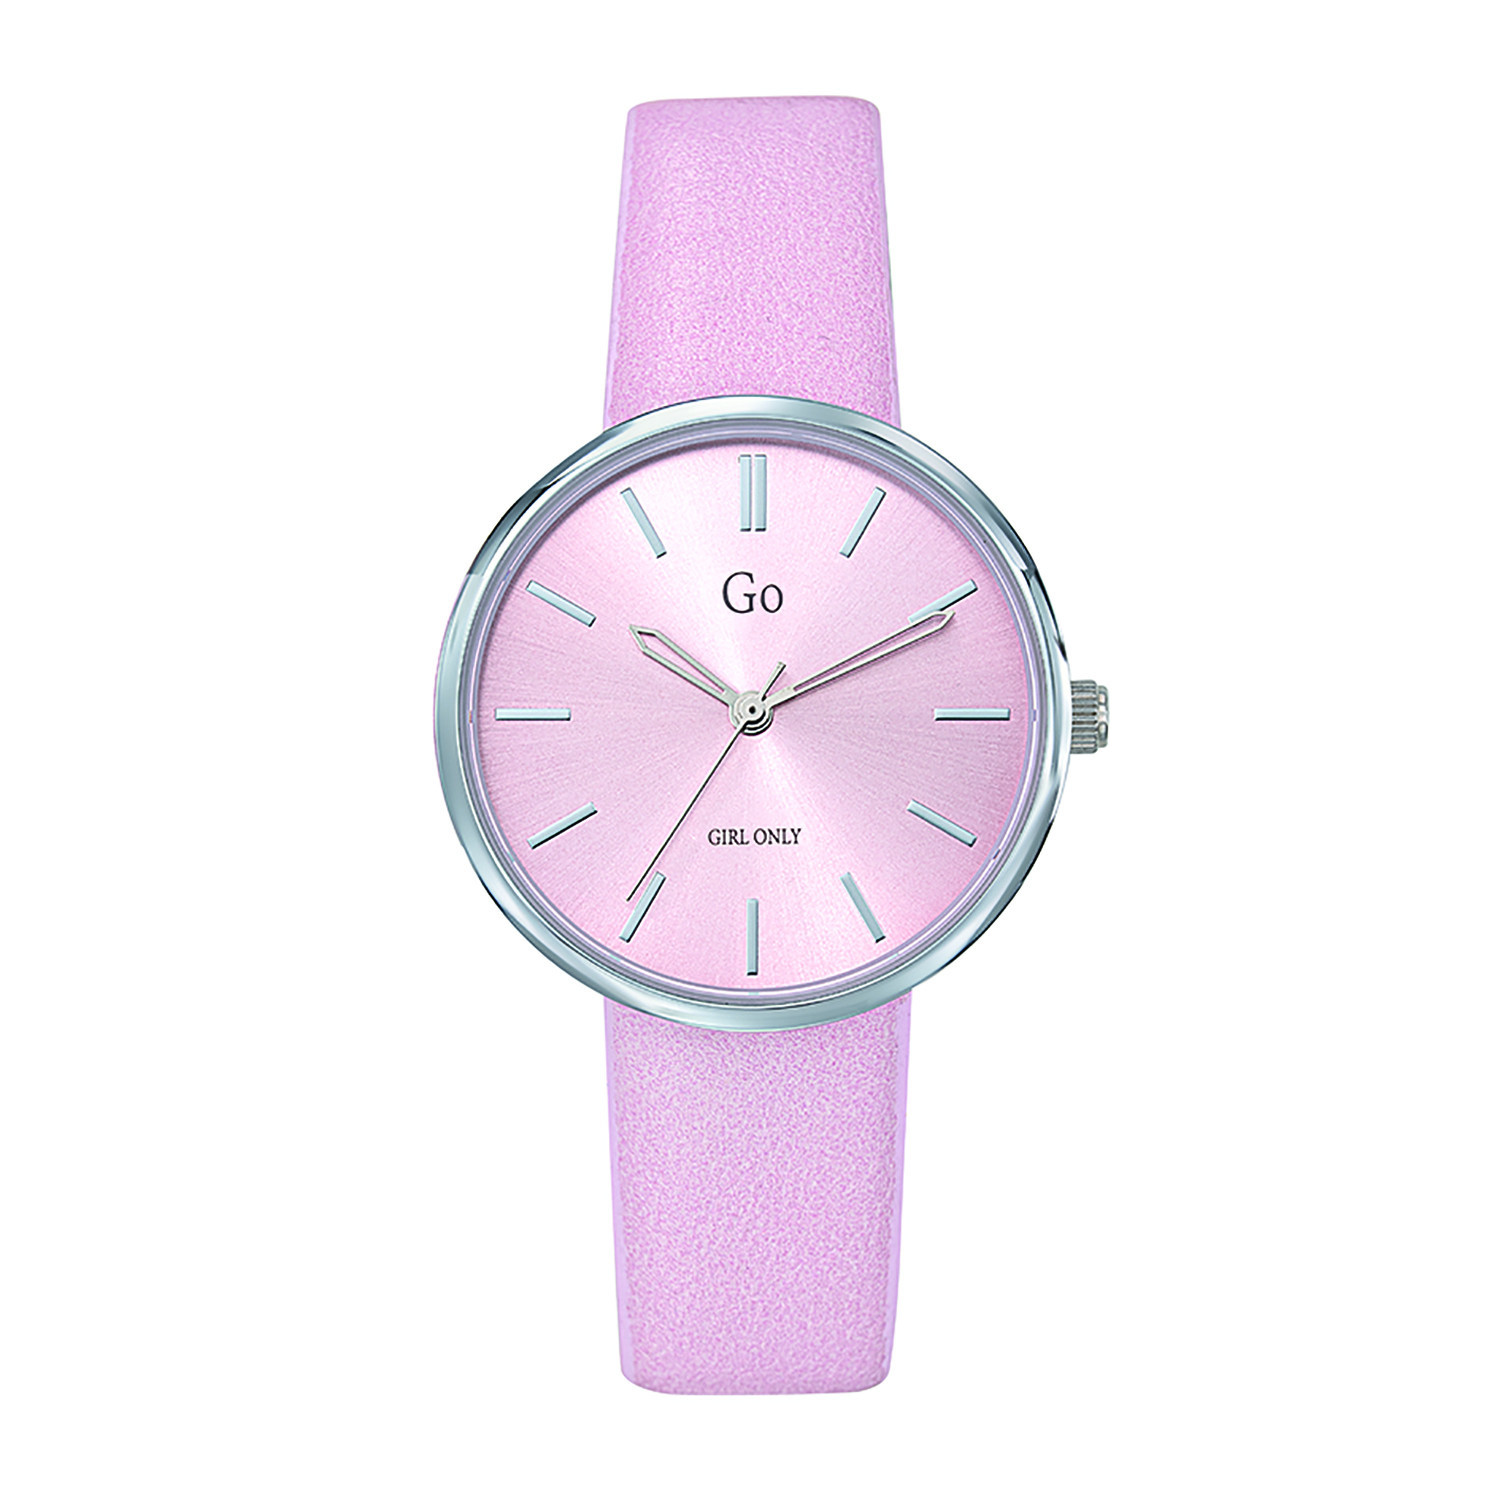 Montre femme Go Girl Only silicone rose cadran rose